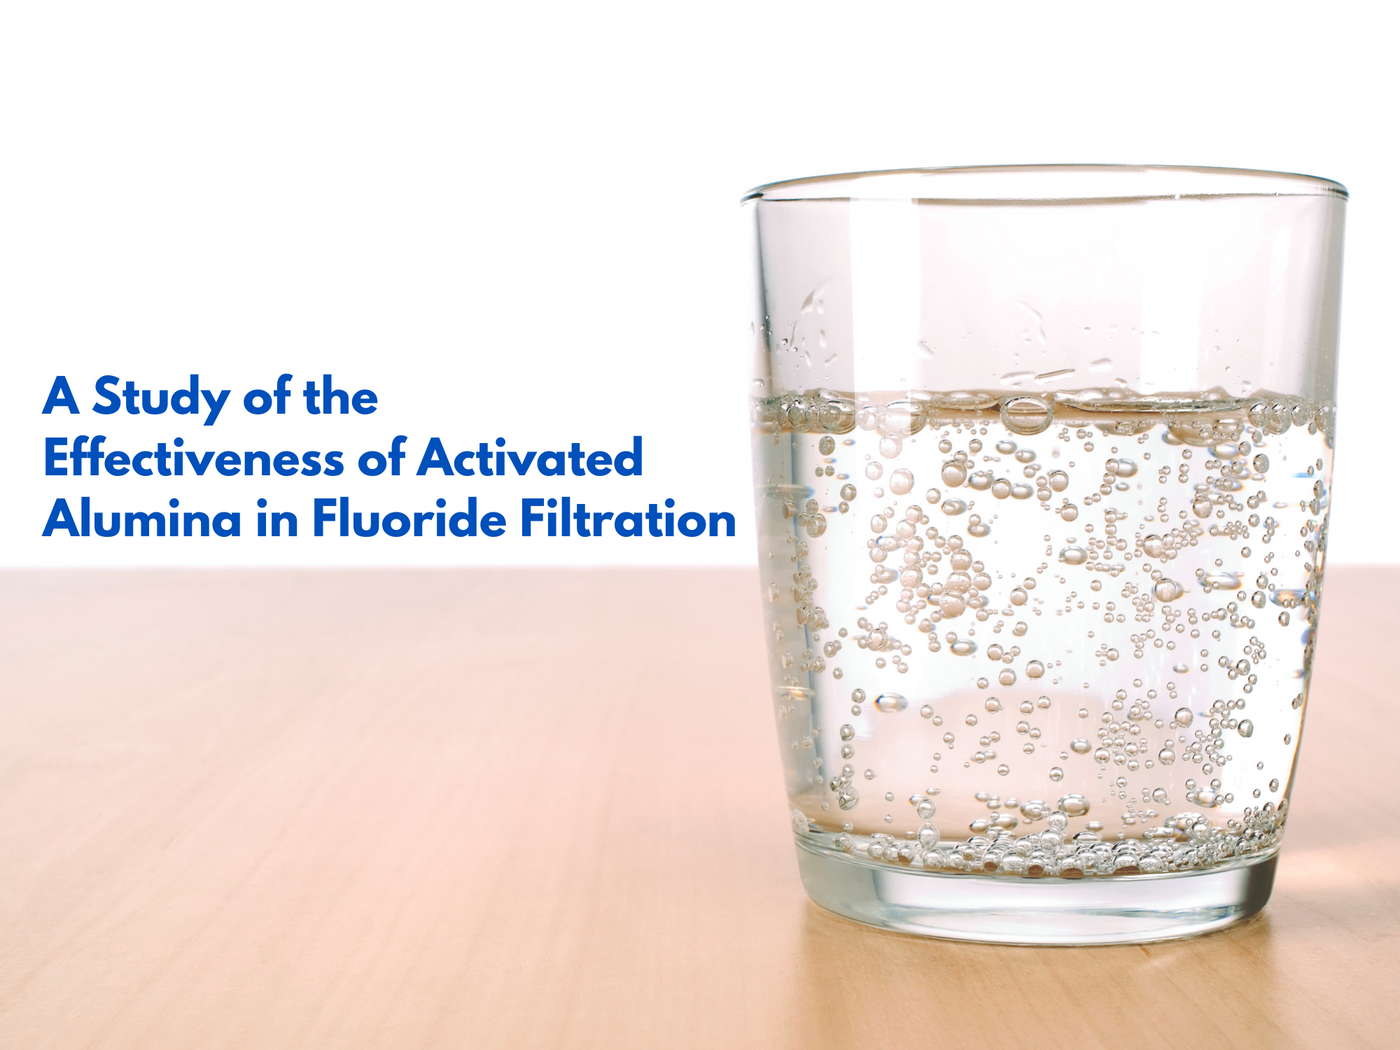 Activated Alumina in Fluoride Filtration